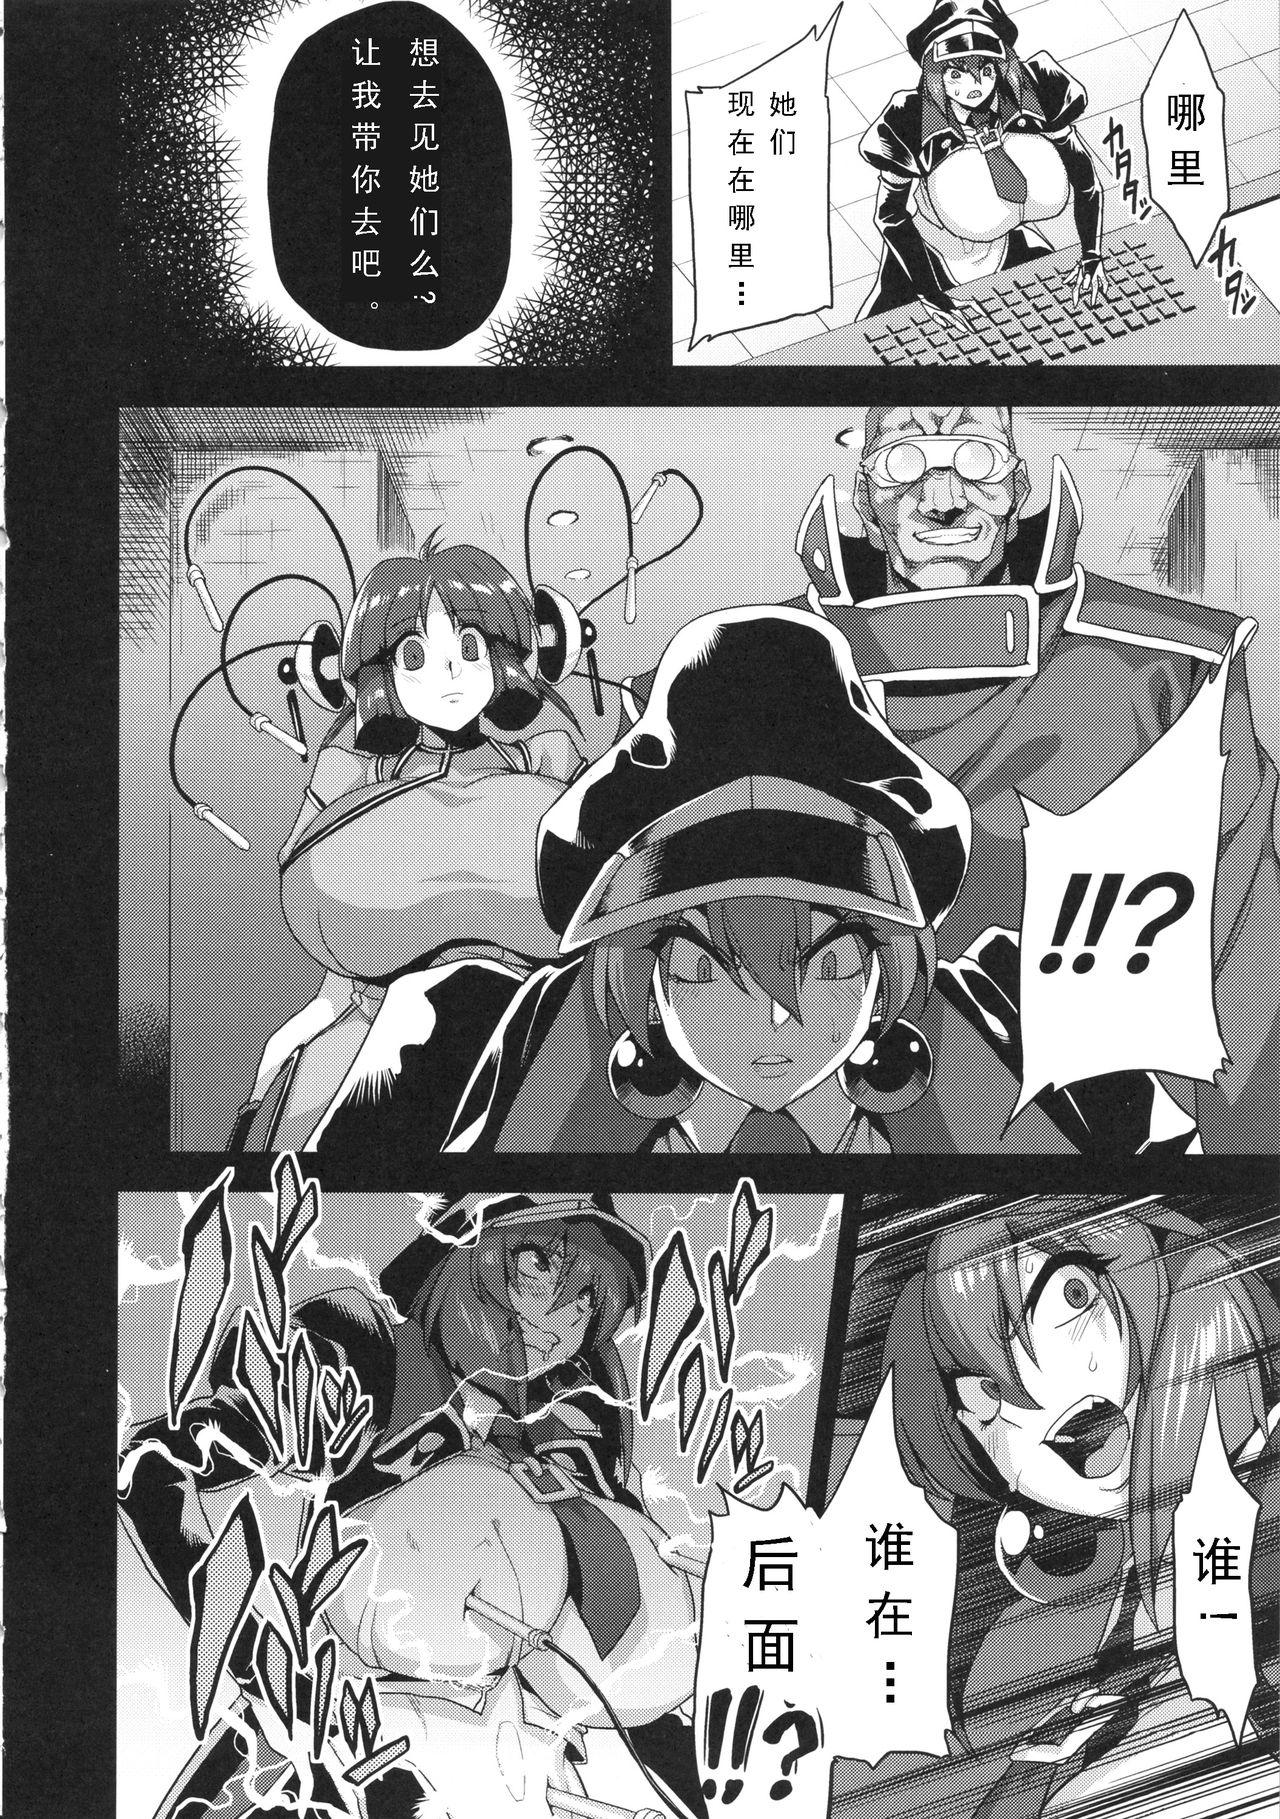 Leggings Hentai Marionette 2 - Saber marionette Hole - Page 9